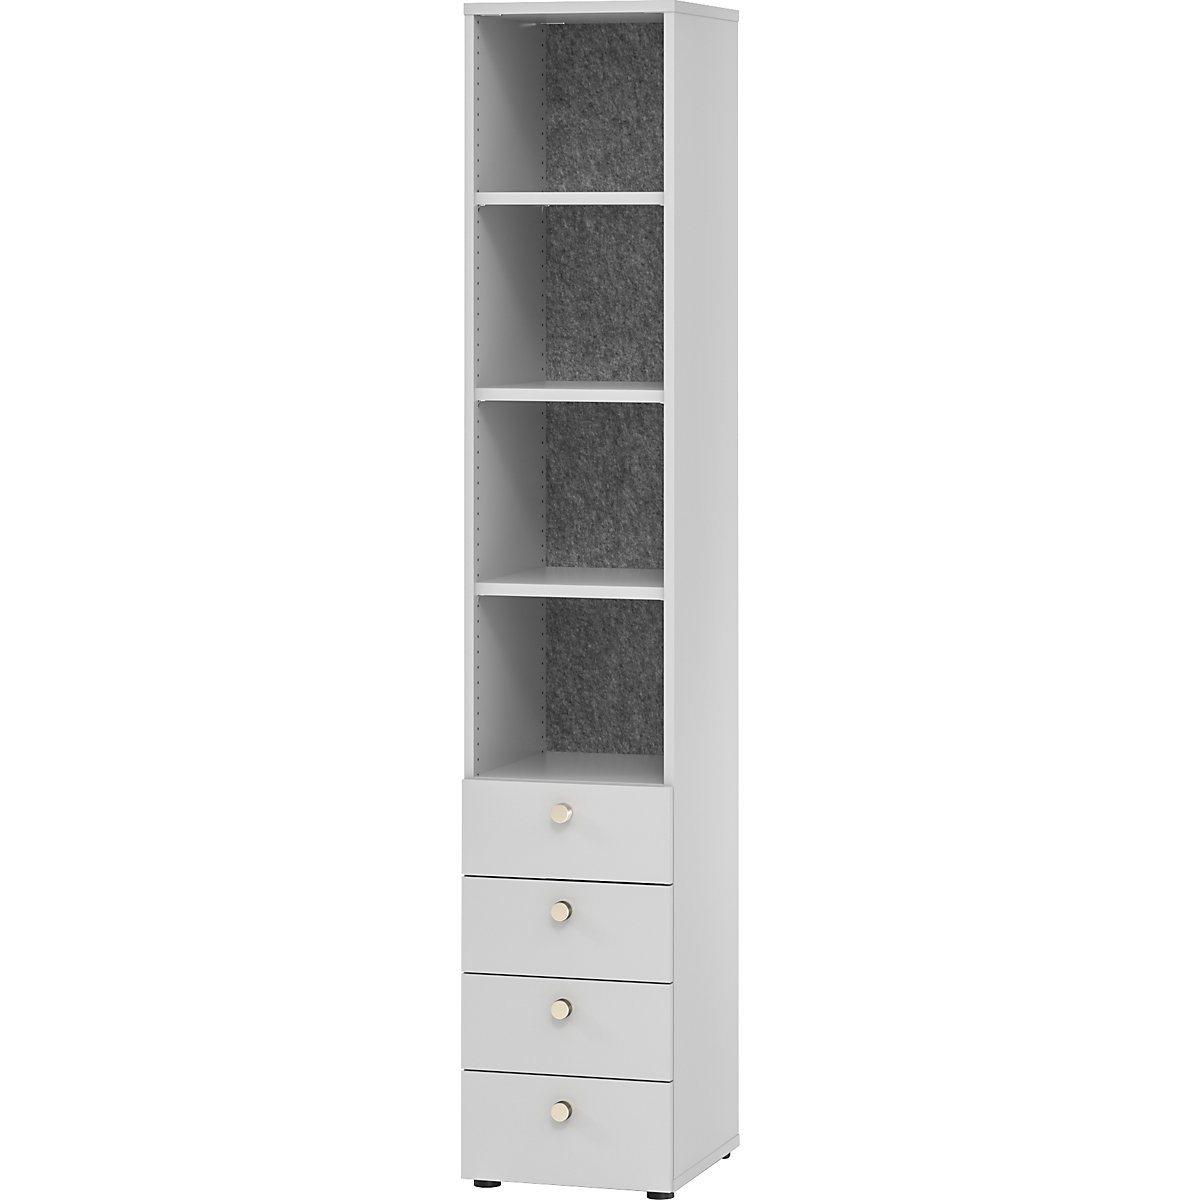 Combination cupboard with acoustic rear panel ANNY-AC, 5 shelves, 4 drawers, light grey-7